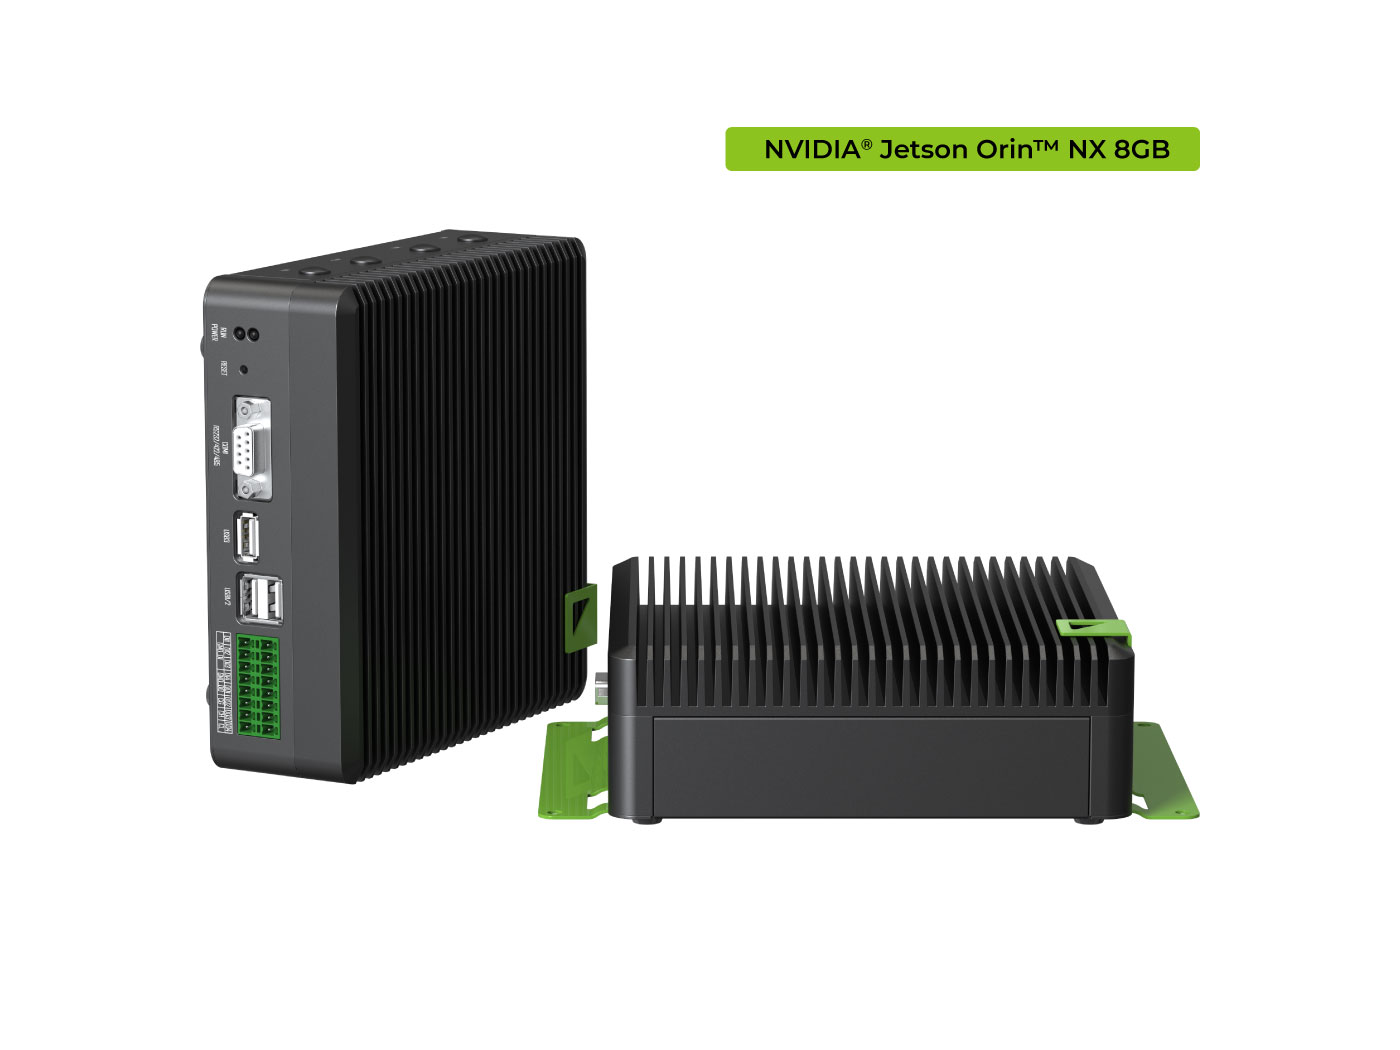 [110110190]reComputer?Industrial?J4011- Fanless Edge AI Device with Jetson Orin™ NX 8GB module, Aluminum case with passive cooling, 2xRJ45 GbE, 1xRS232/RS-422/RS-485, 4xDI/DO, 1xCAN, 3xUSB3.2, Pre-installed Jet